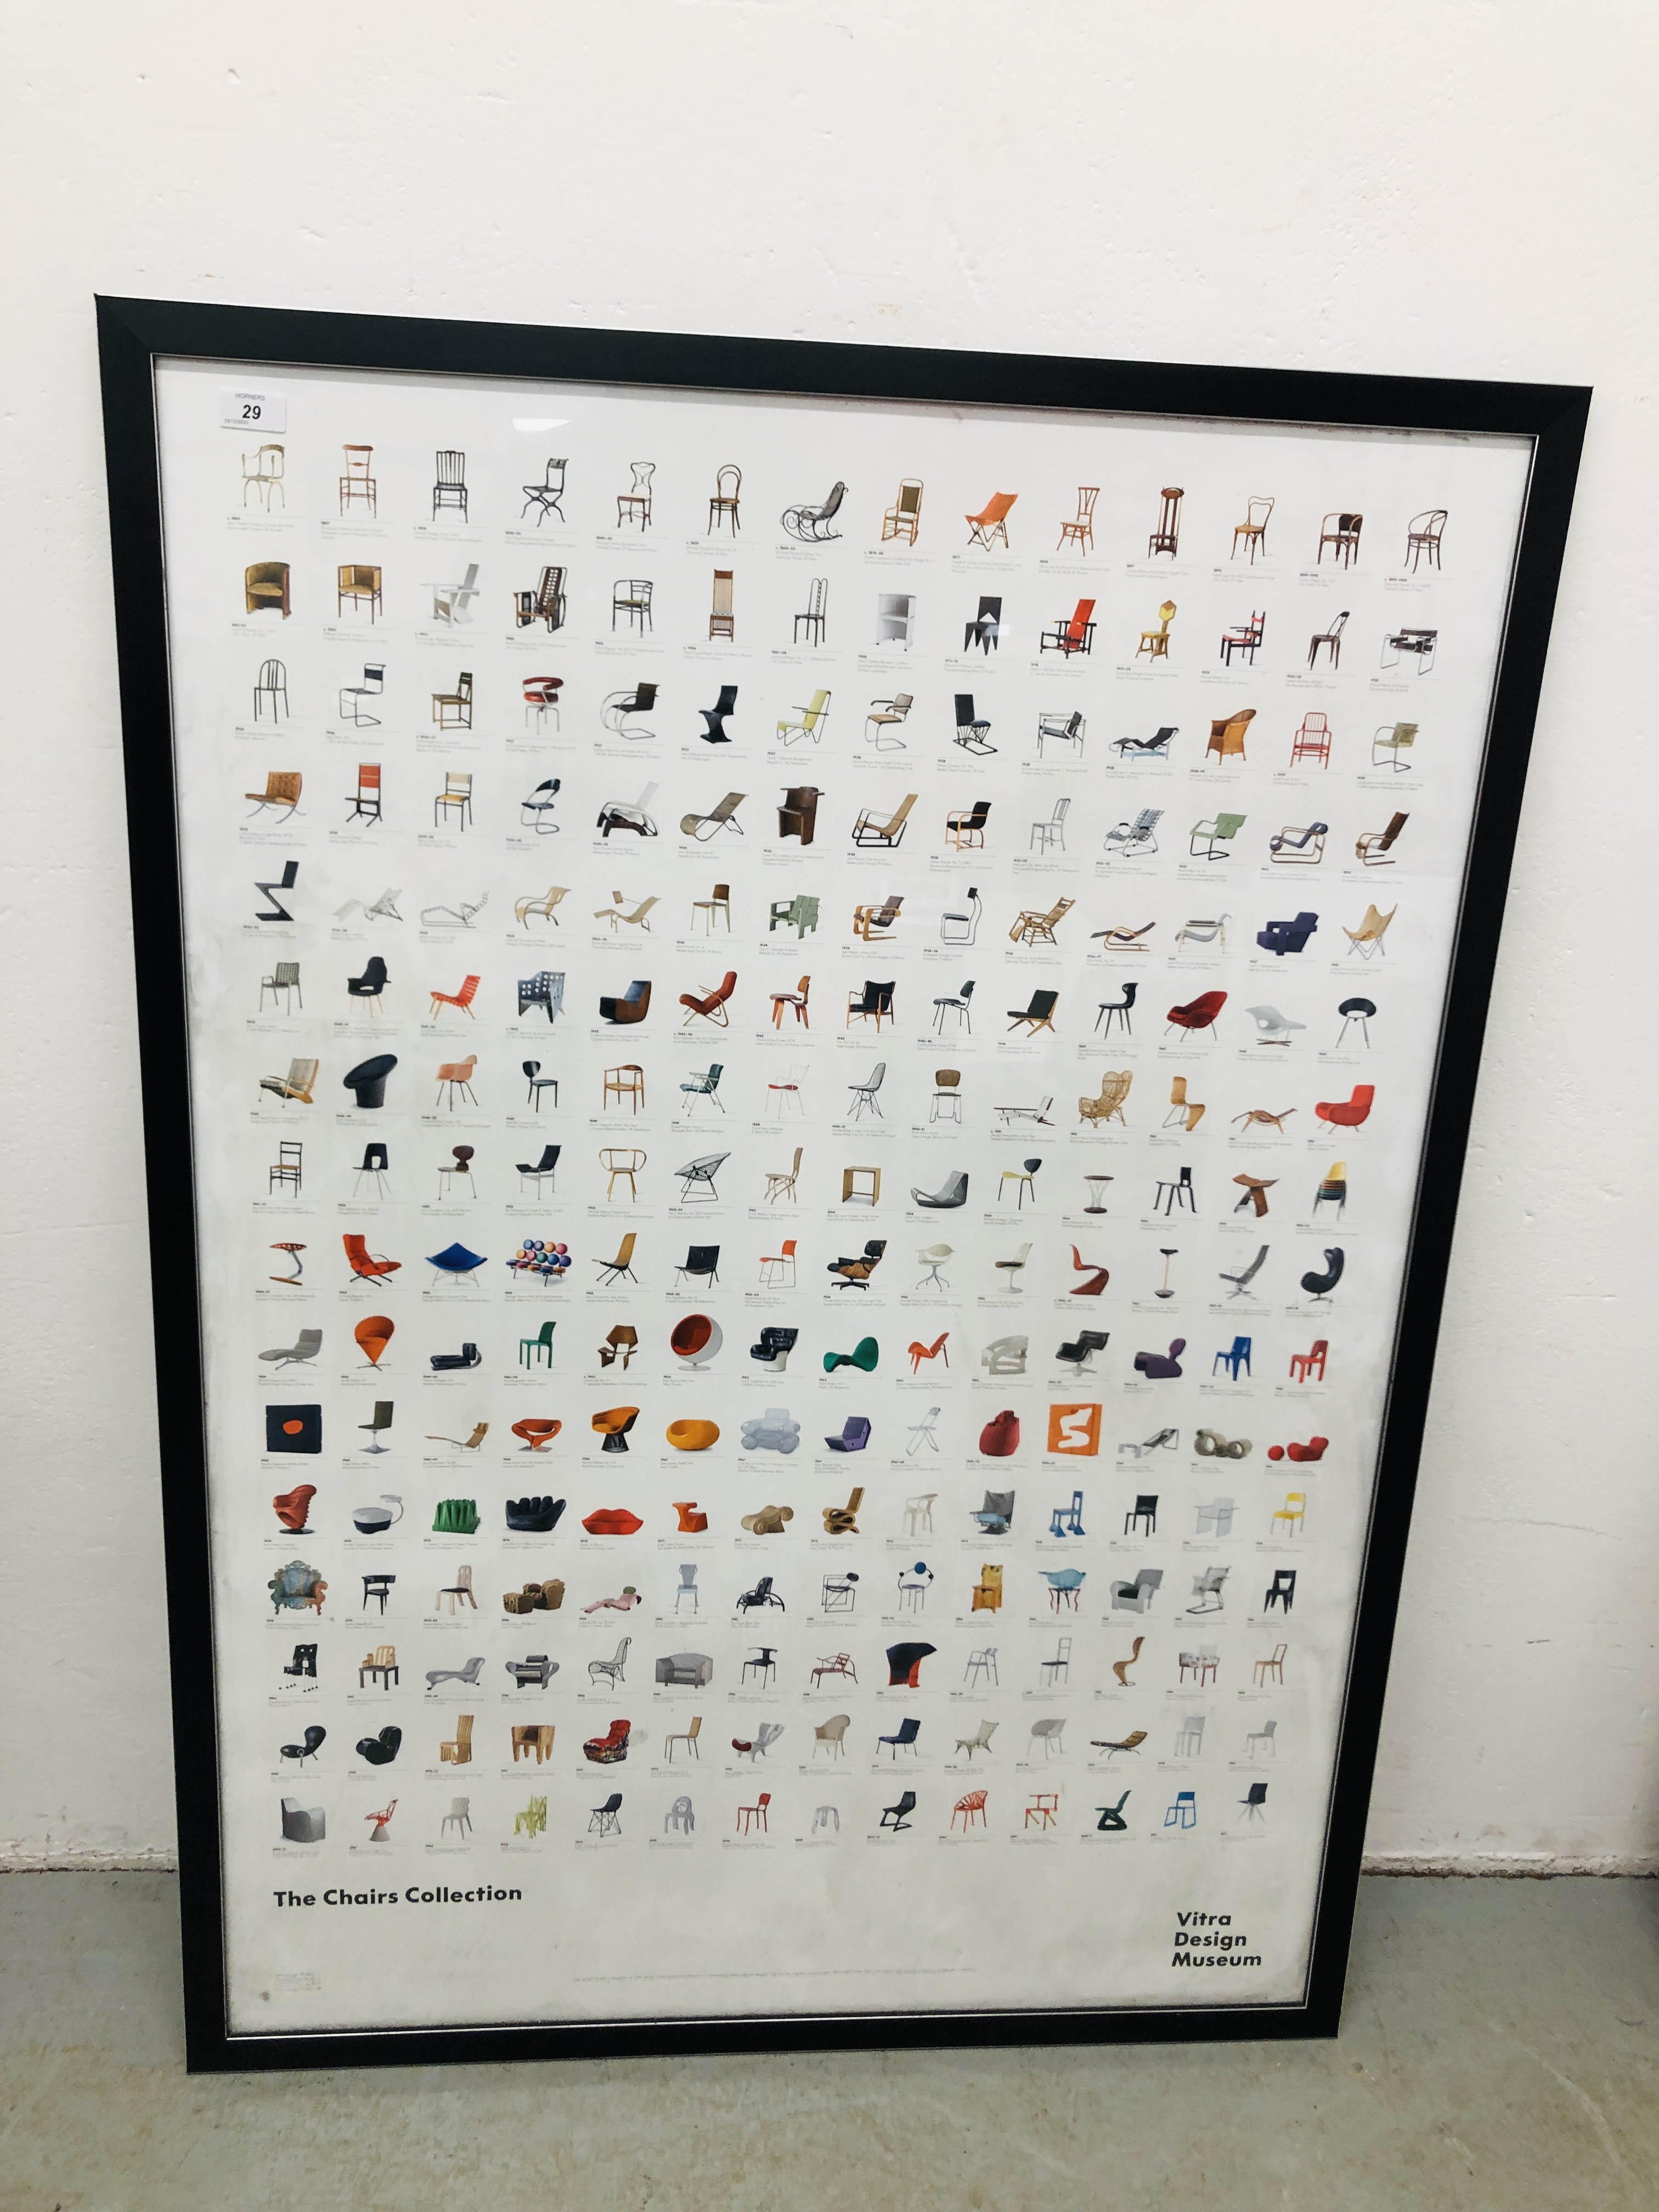 A LARGE VITRA DESIGN MUSEUM "THE CHAIRS COLLECTION" POSTER 1803 TO 2012.